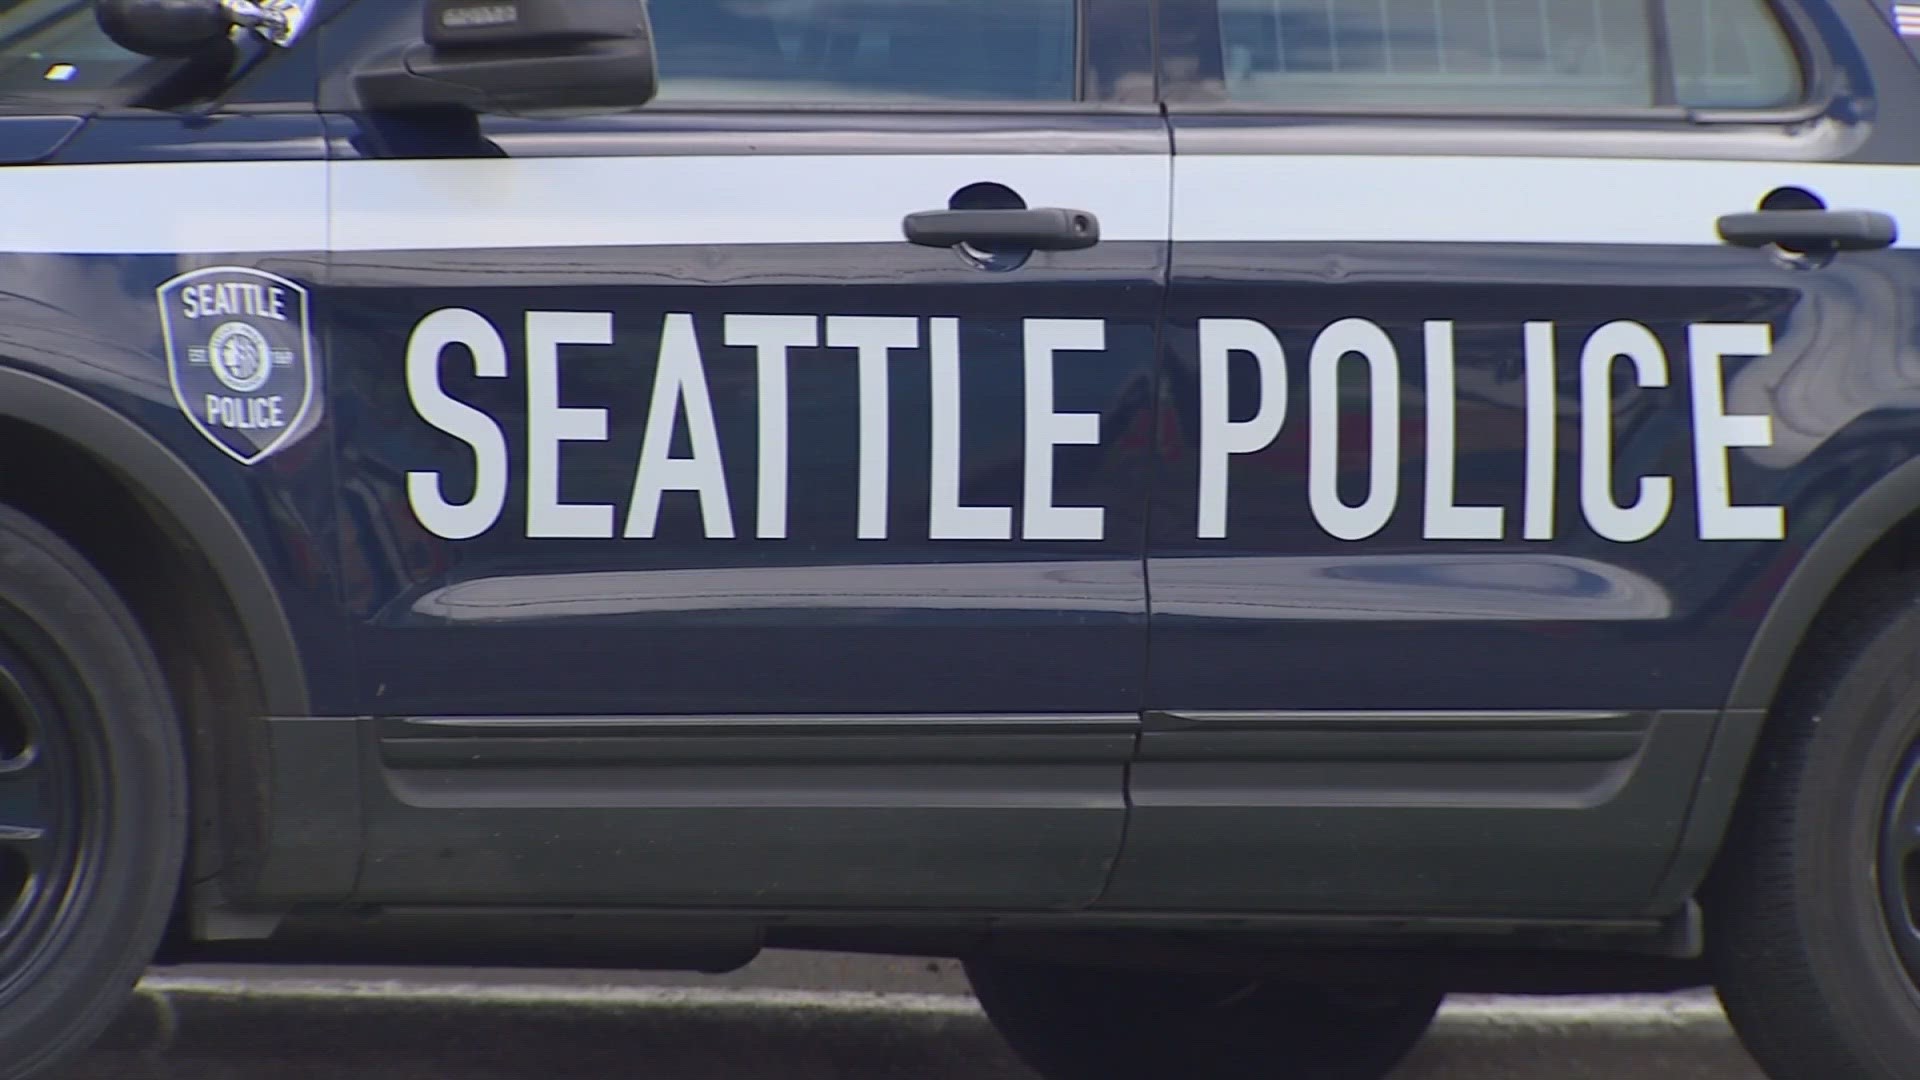 A judge agreed the City of Seattle and the Seattle Police Department "sustained compliance with most requirements of the federal consent decree."